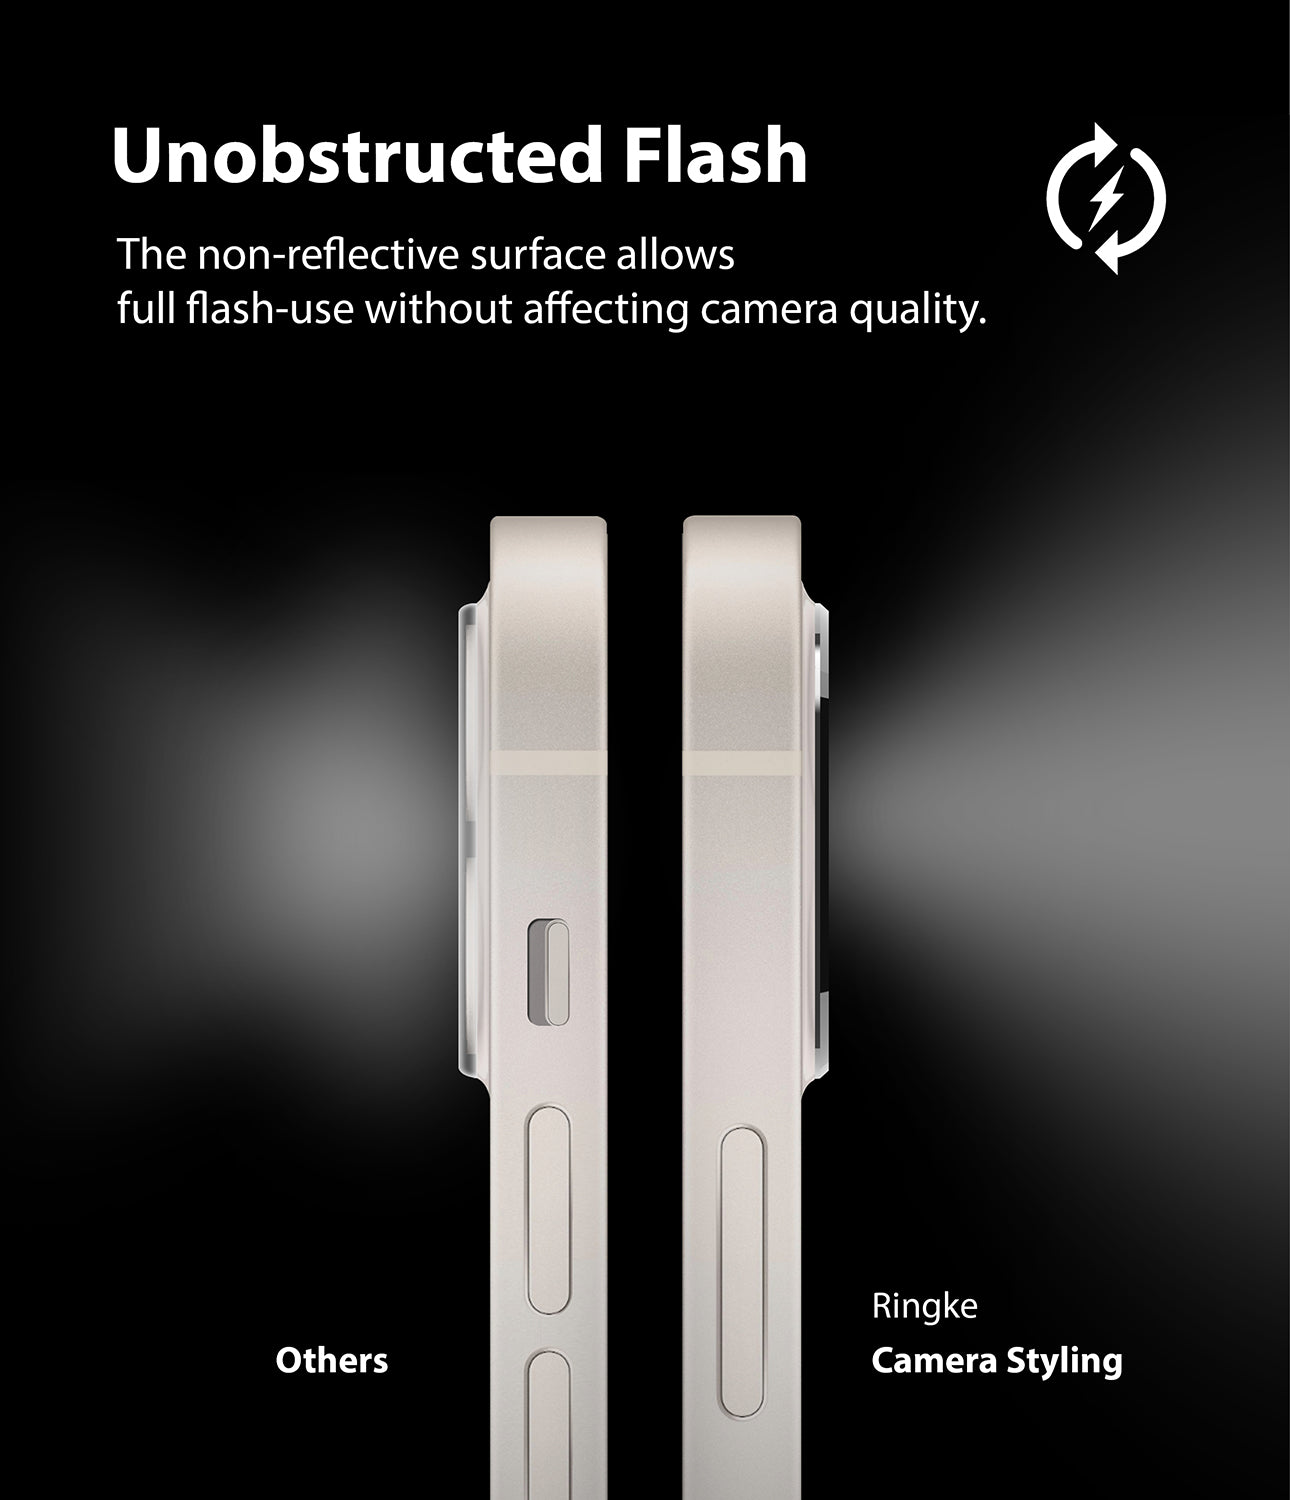 unobstructed flash - the non reflective surface allows full flash use without affecting camera quality